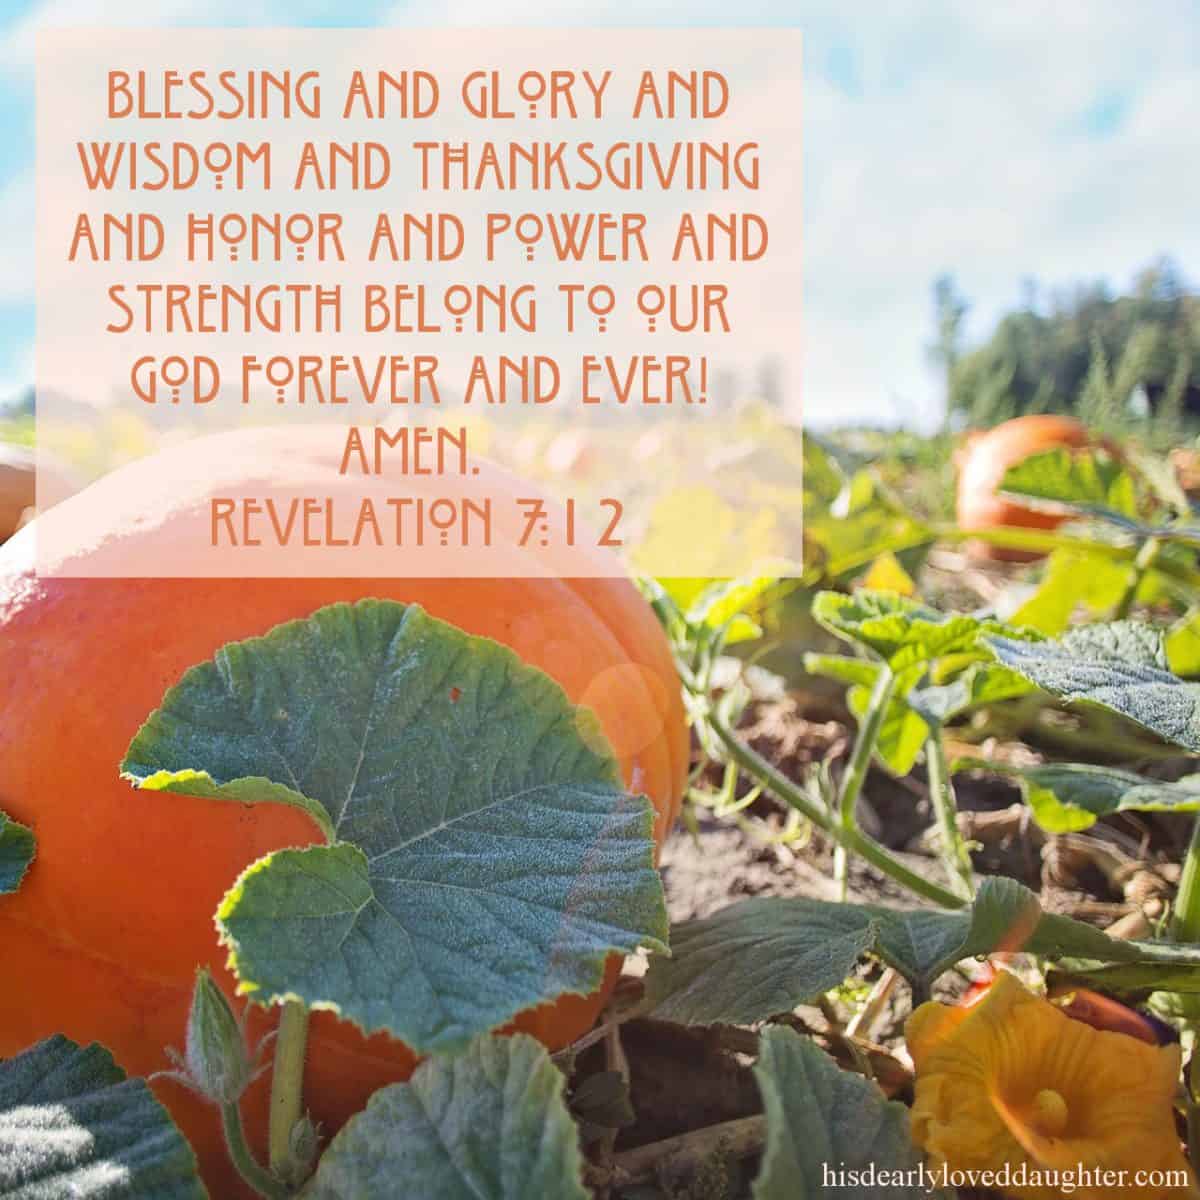 Blessing and glory and wisdom and thanksgiving and honor and power and strength belong to our God forever and ever! Amen. Revelation 7:12